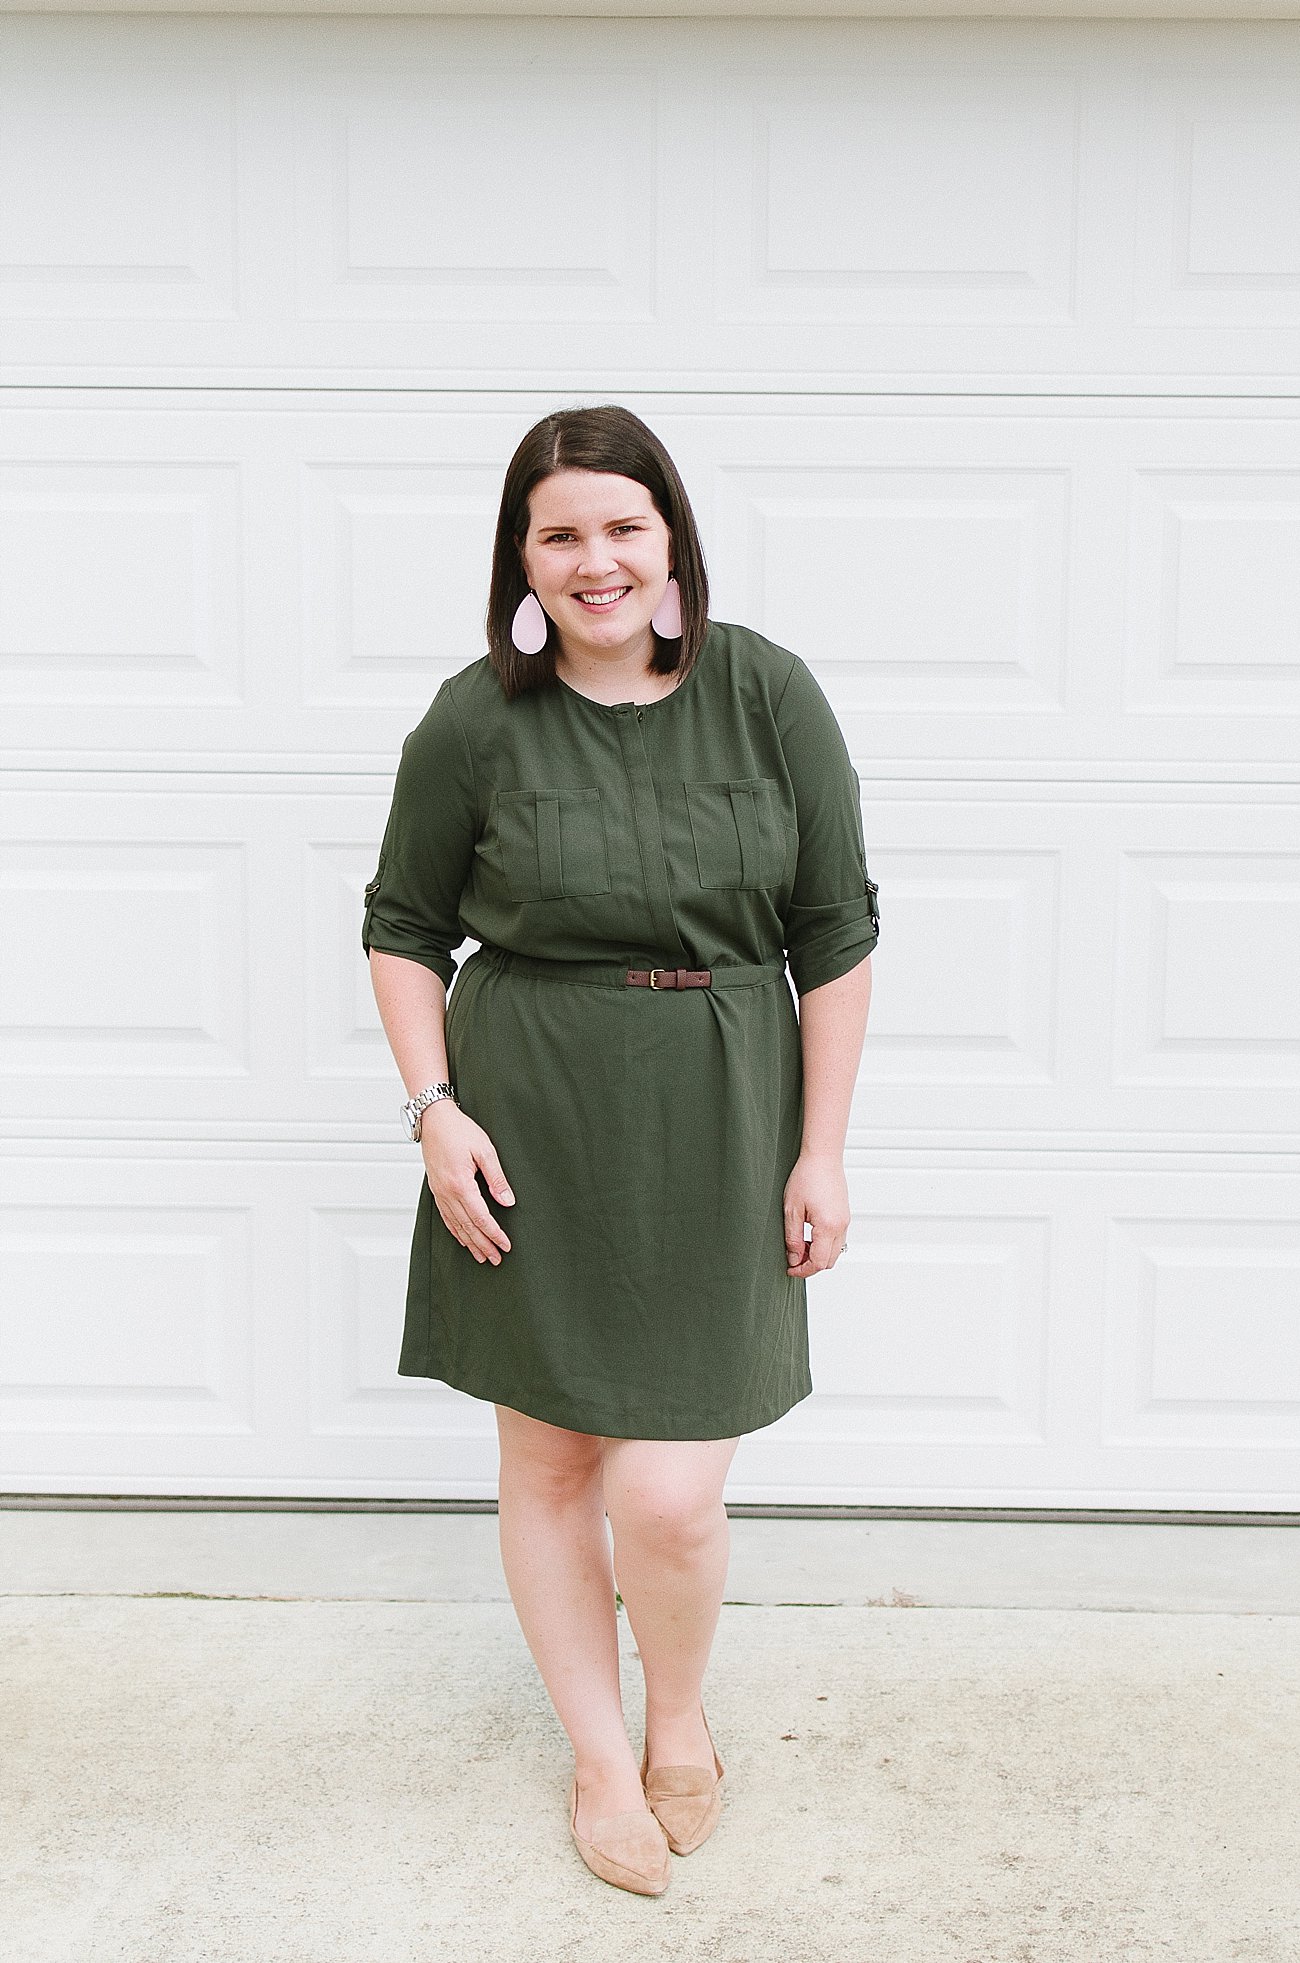 Stitch Fix Review #33 - Skies Are Blue "Delaine Belted Shirt Dress" - Size XL